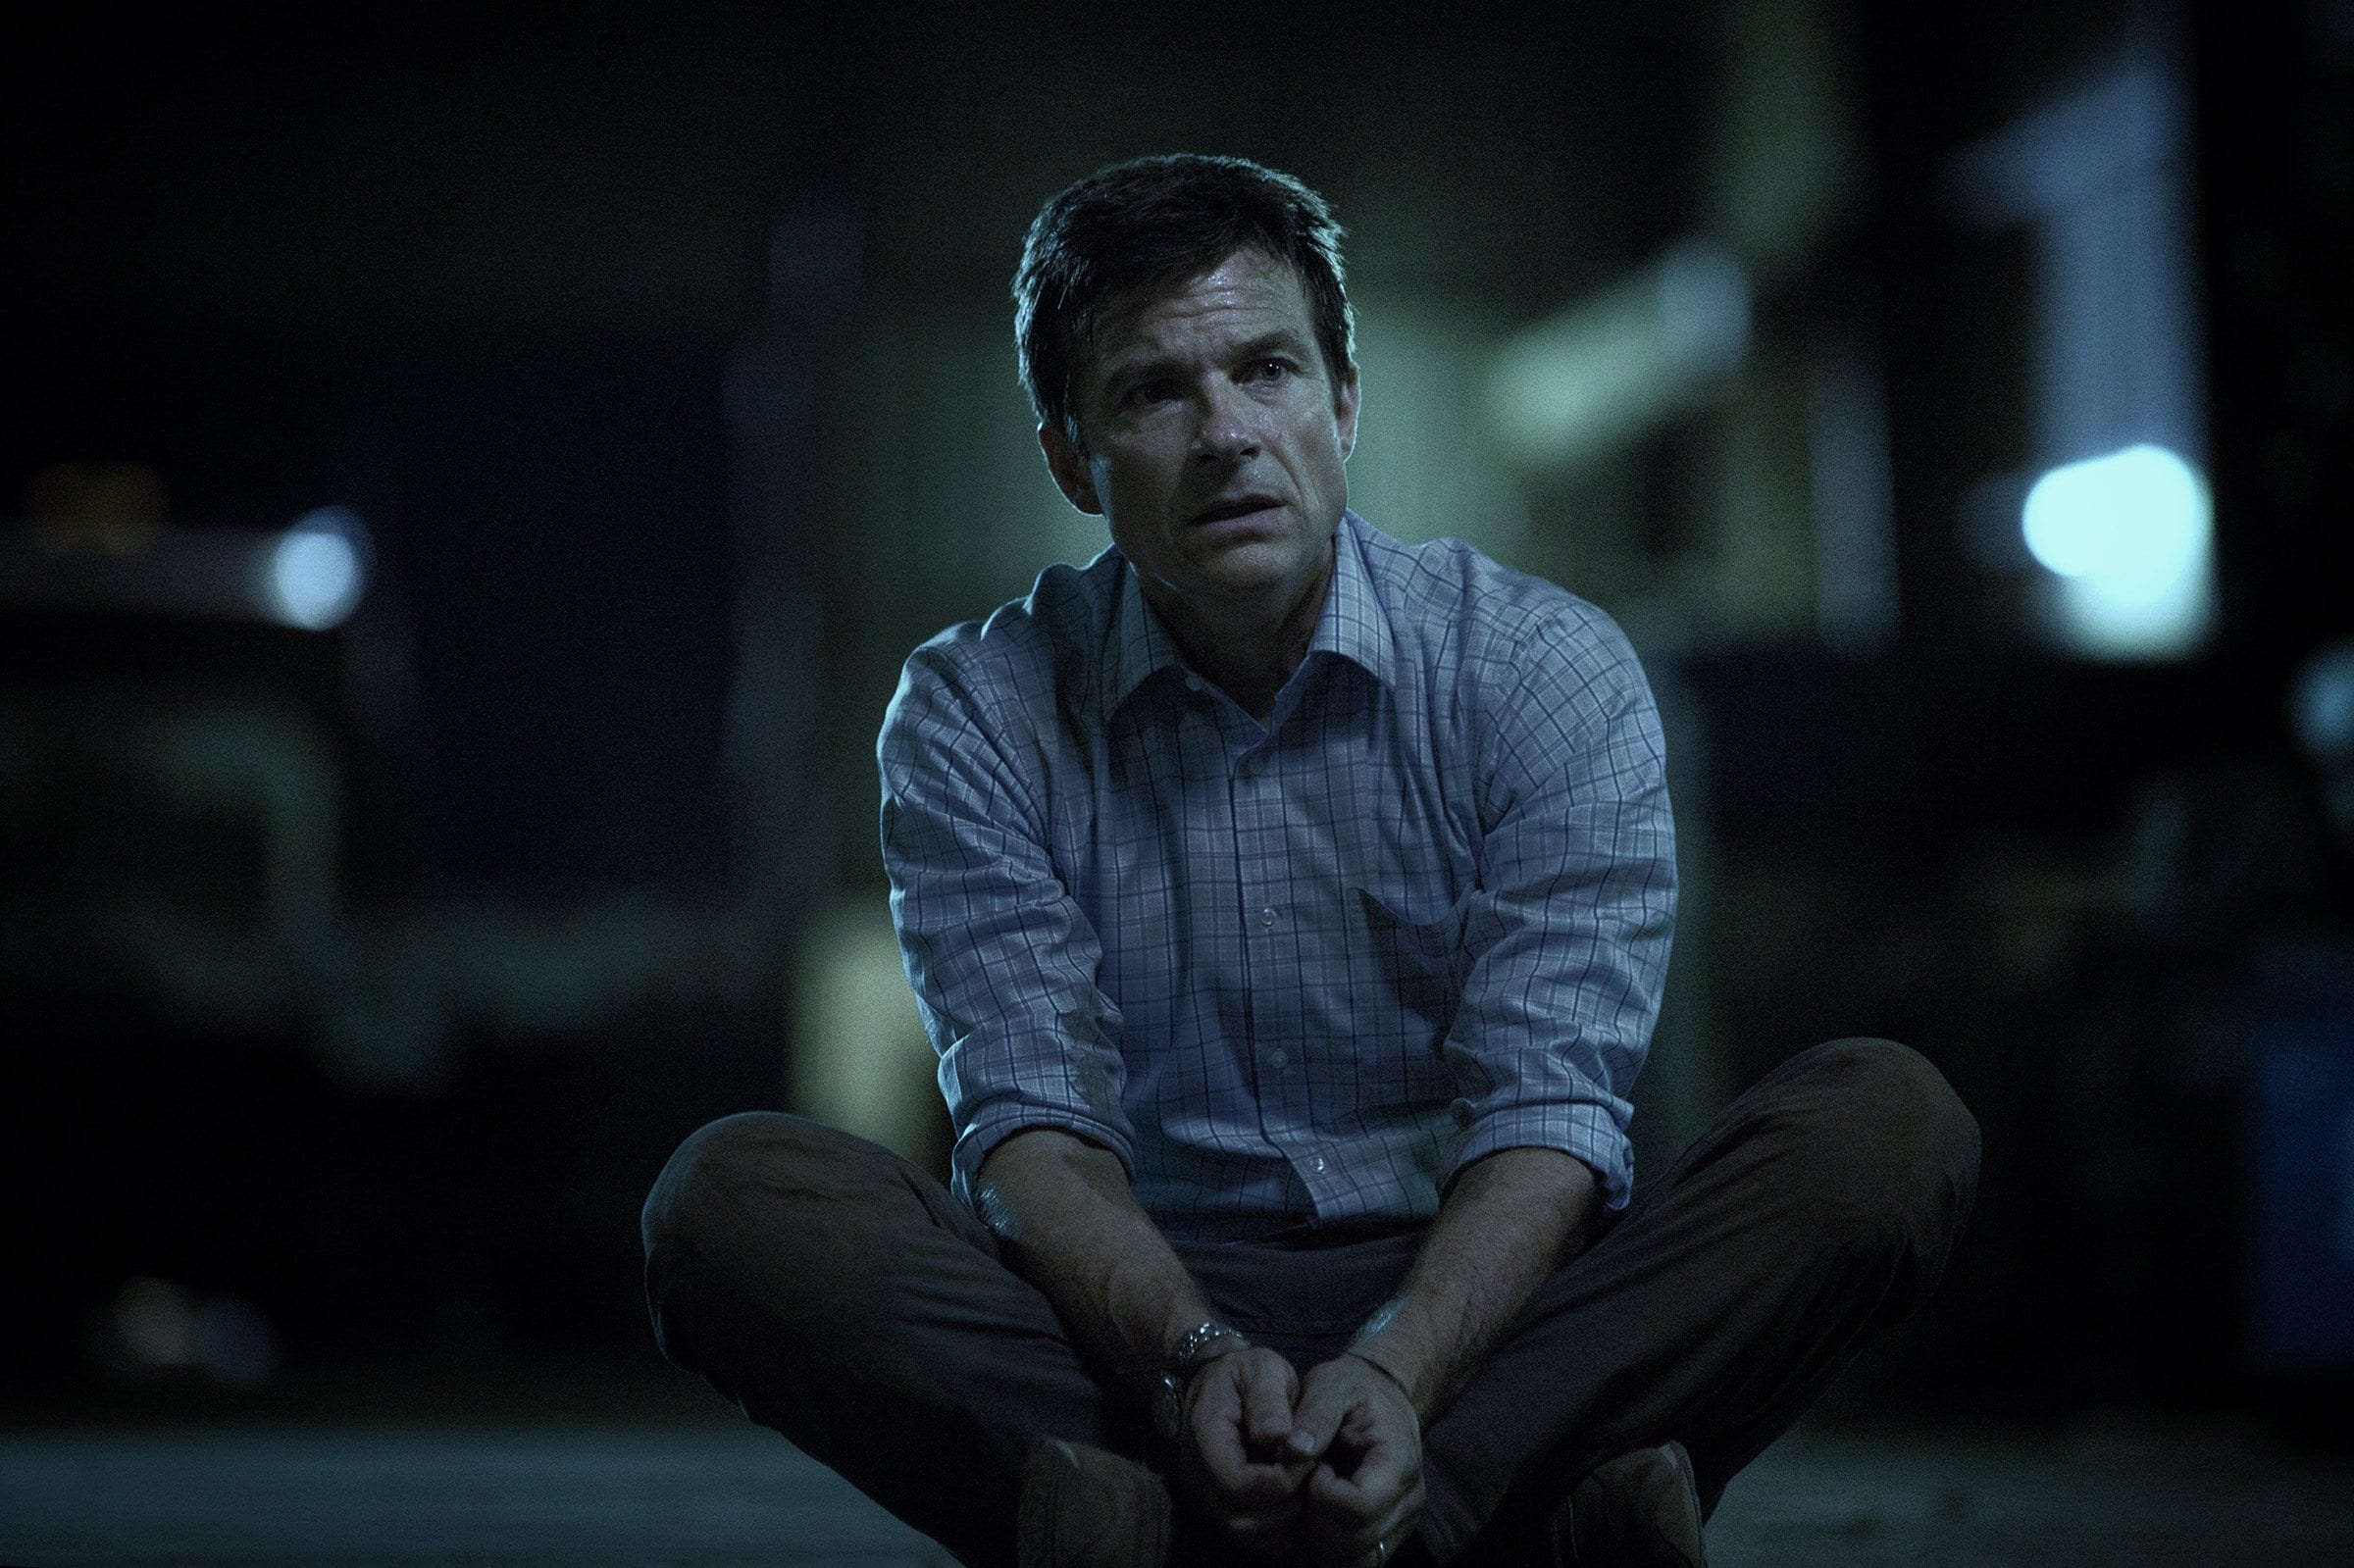 'Ozark' shines as something special and inventive, an intense crime opera where the scenery is as much the star as anyone in the cast.